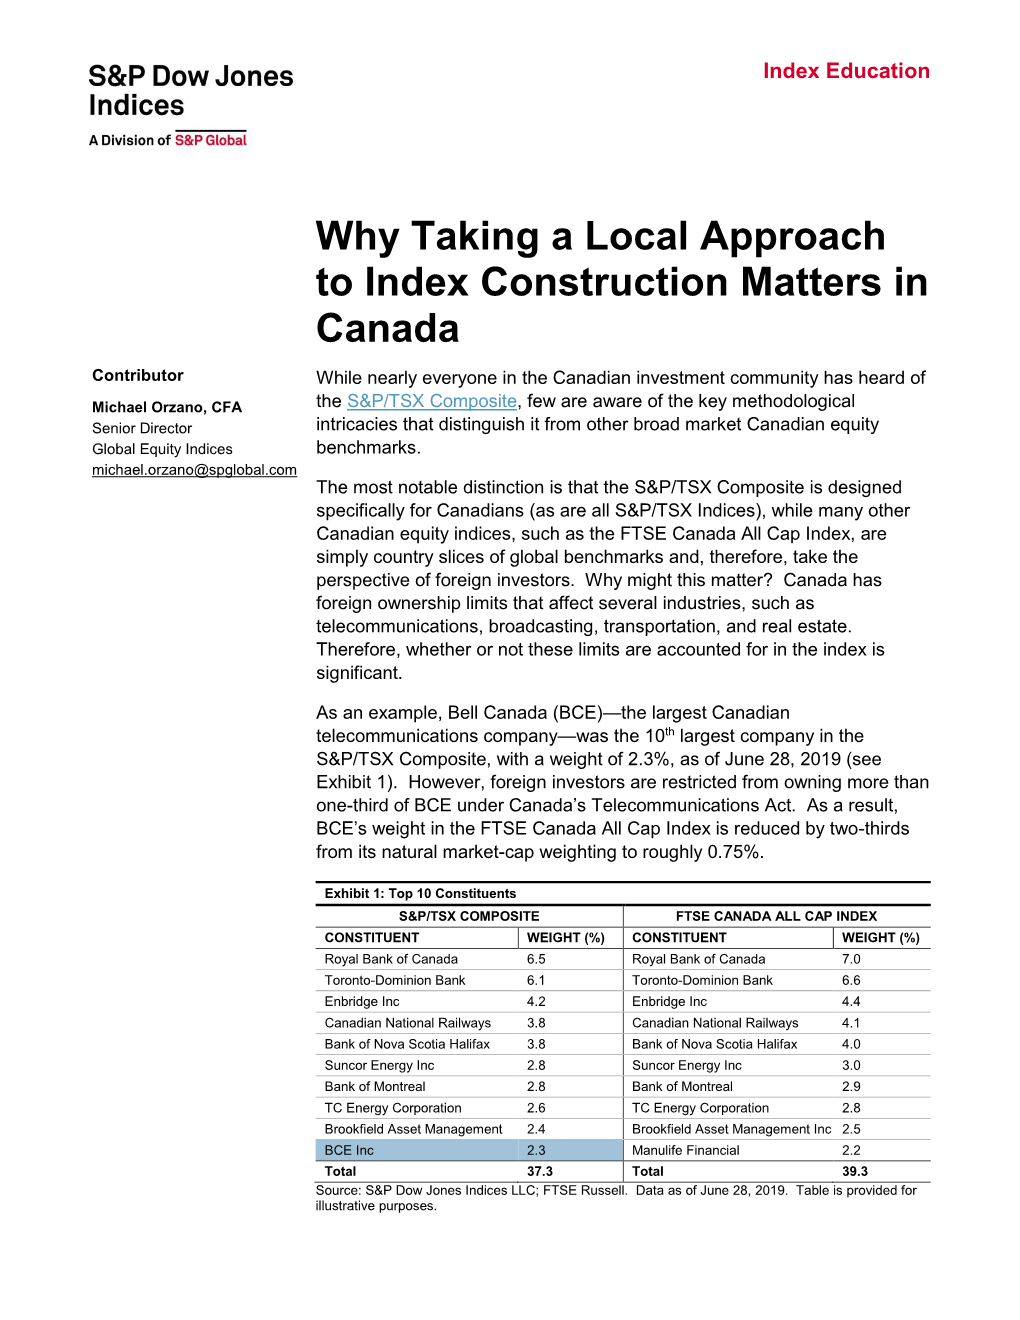 Why Taking a Local Approach to Index Construction Matters in Canada